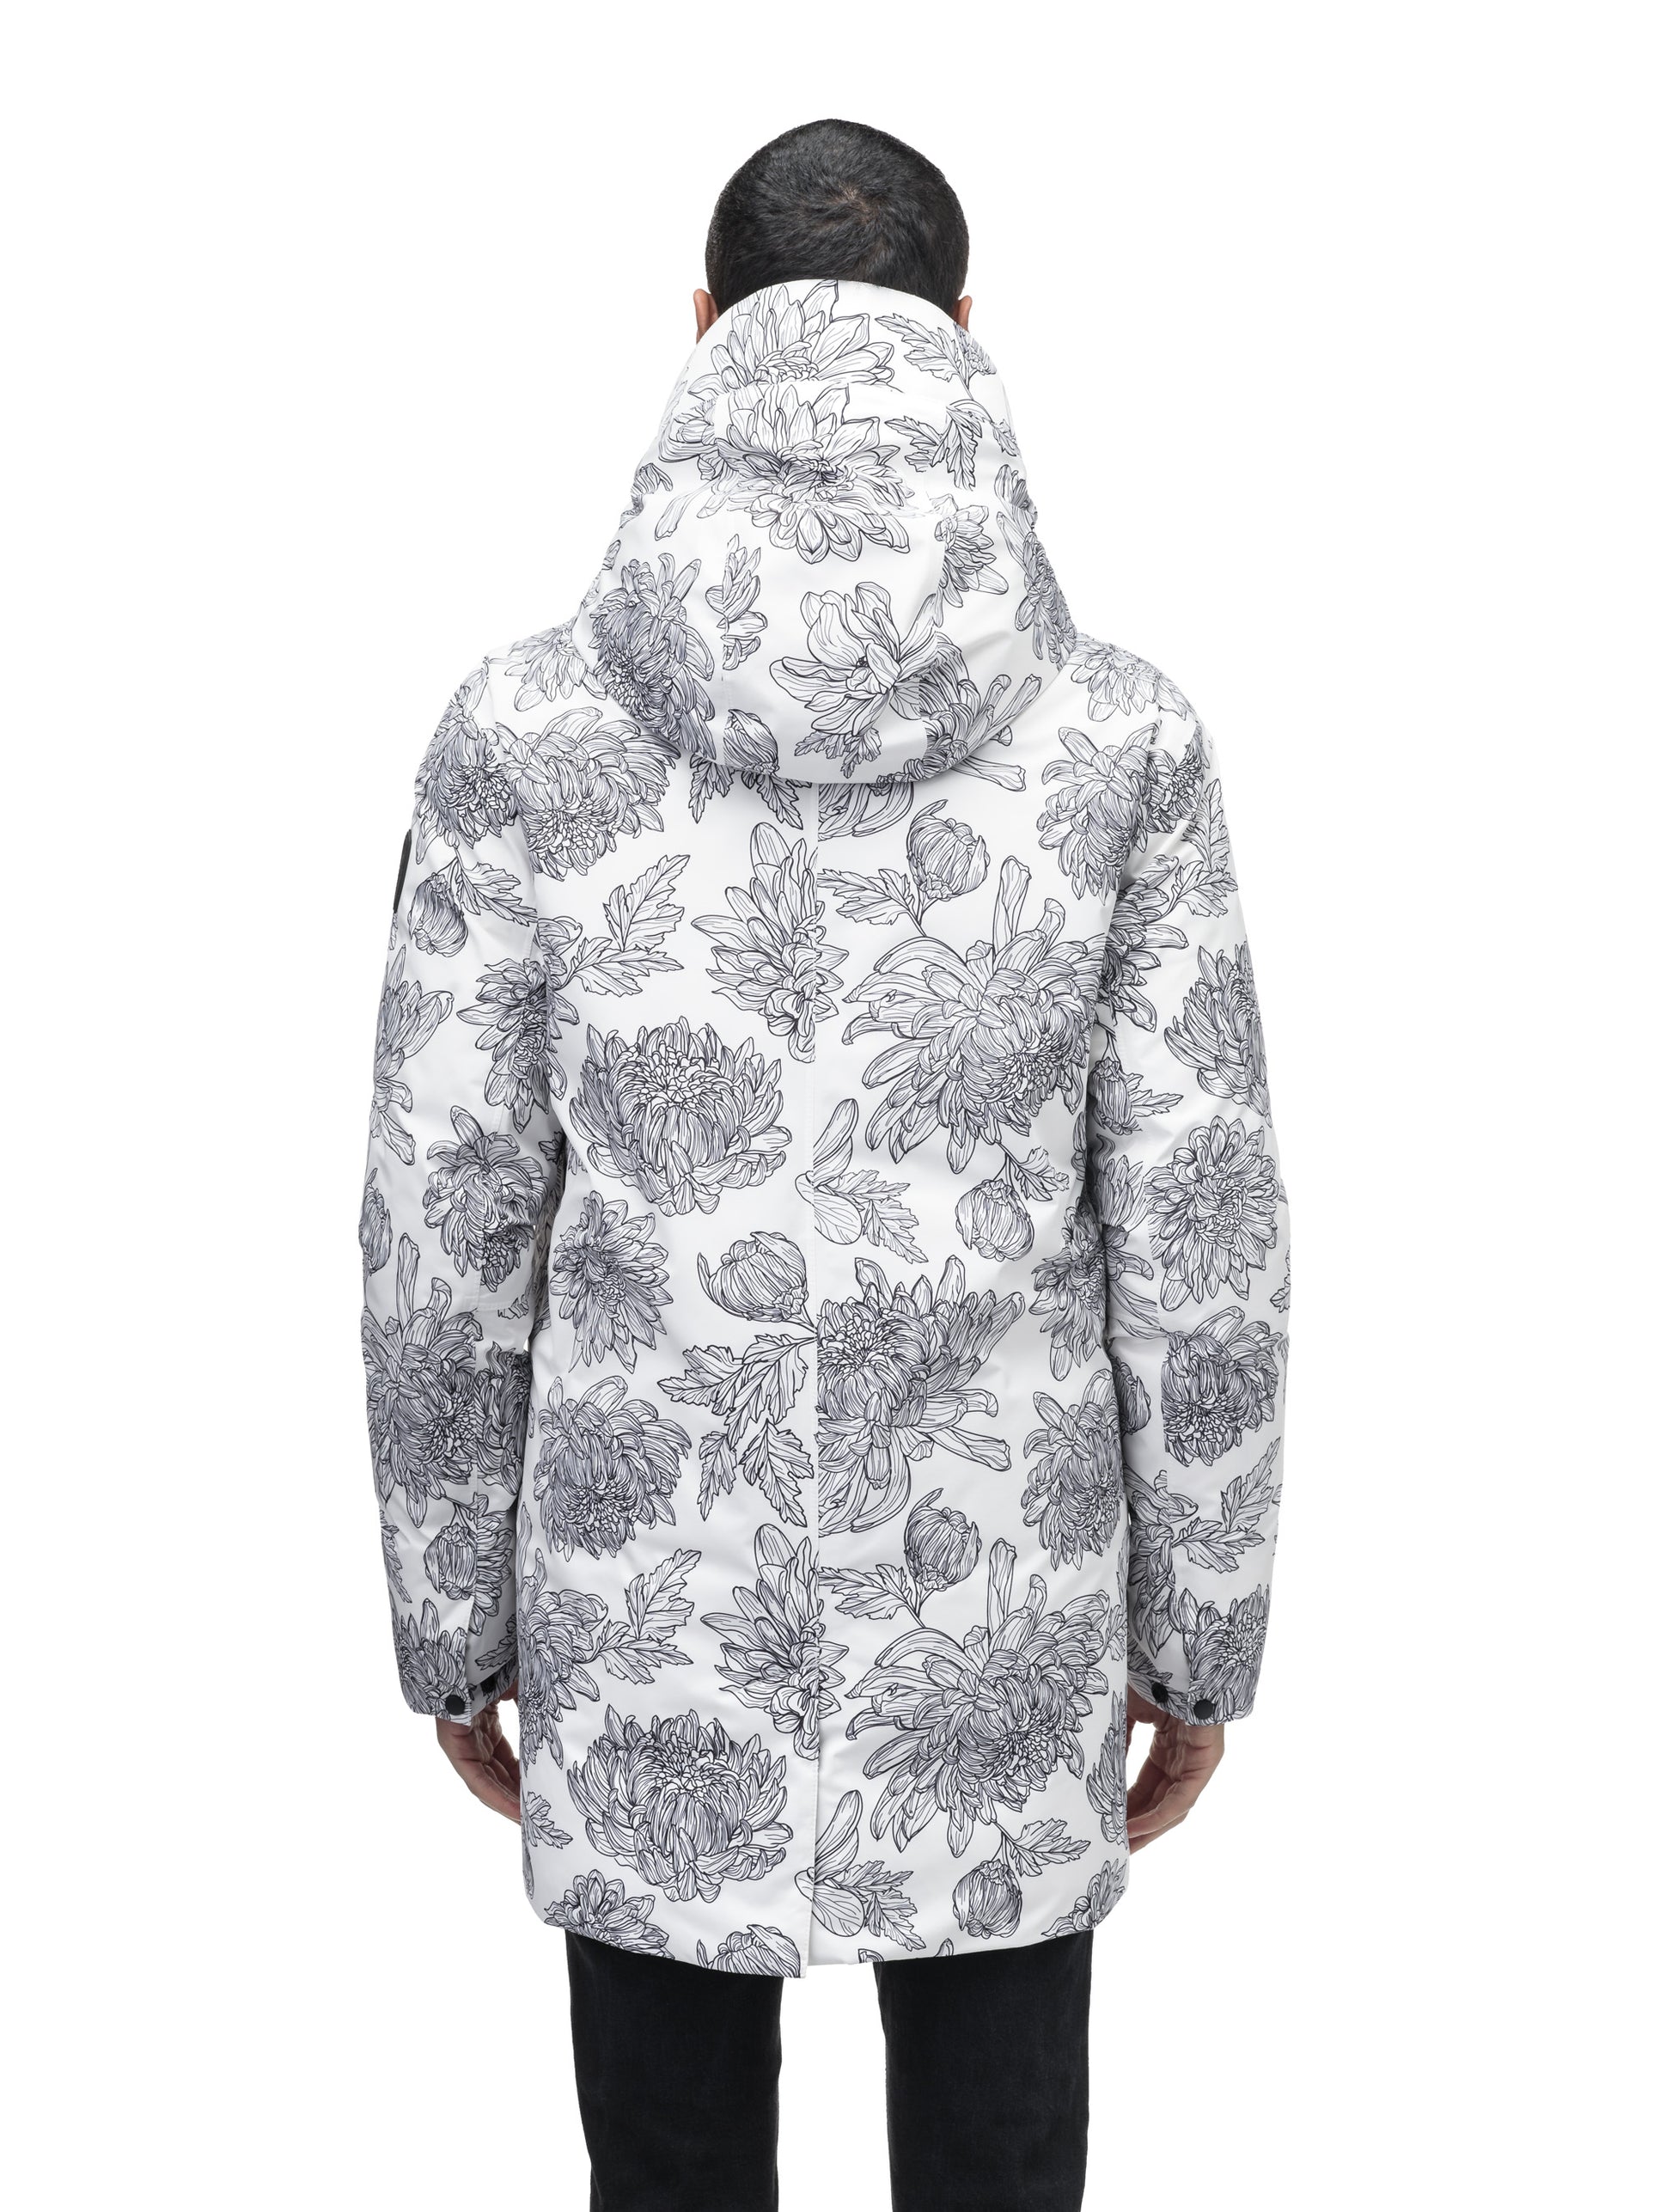 Atlas Men's Performance Parka in thigh length, Canadian duck down insulation, removable hood, and two-way zipper, in White Floral